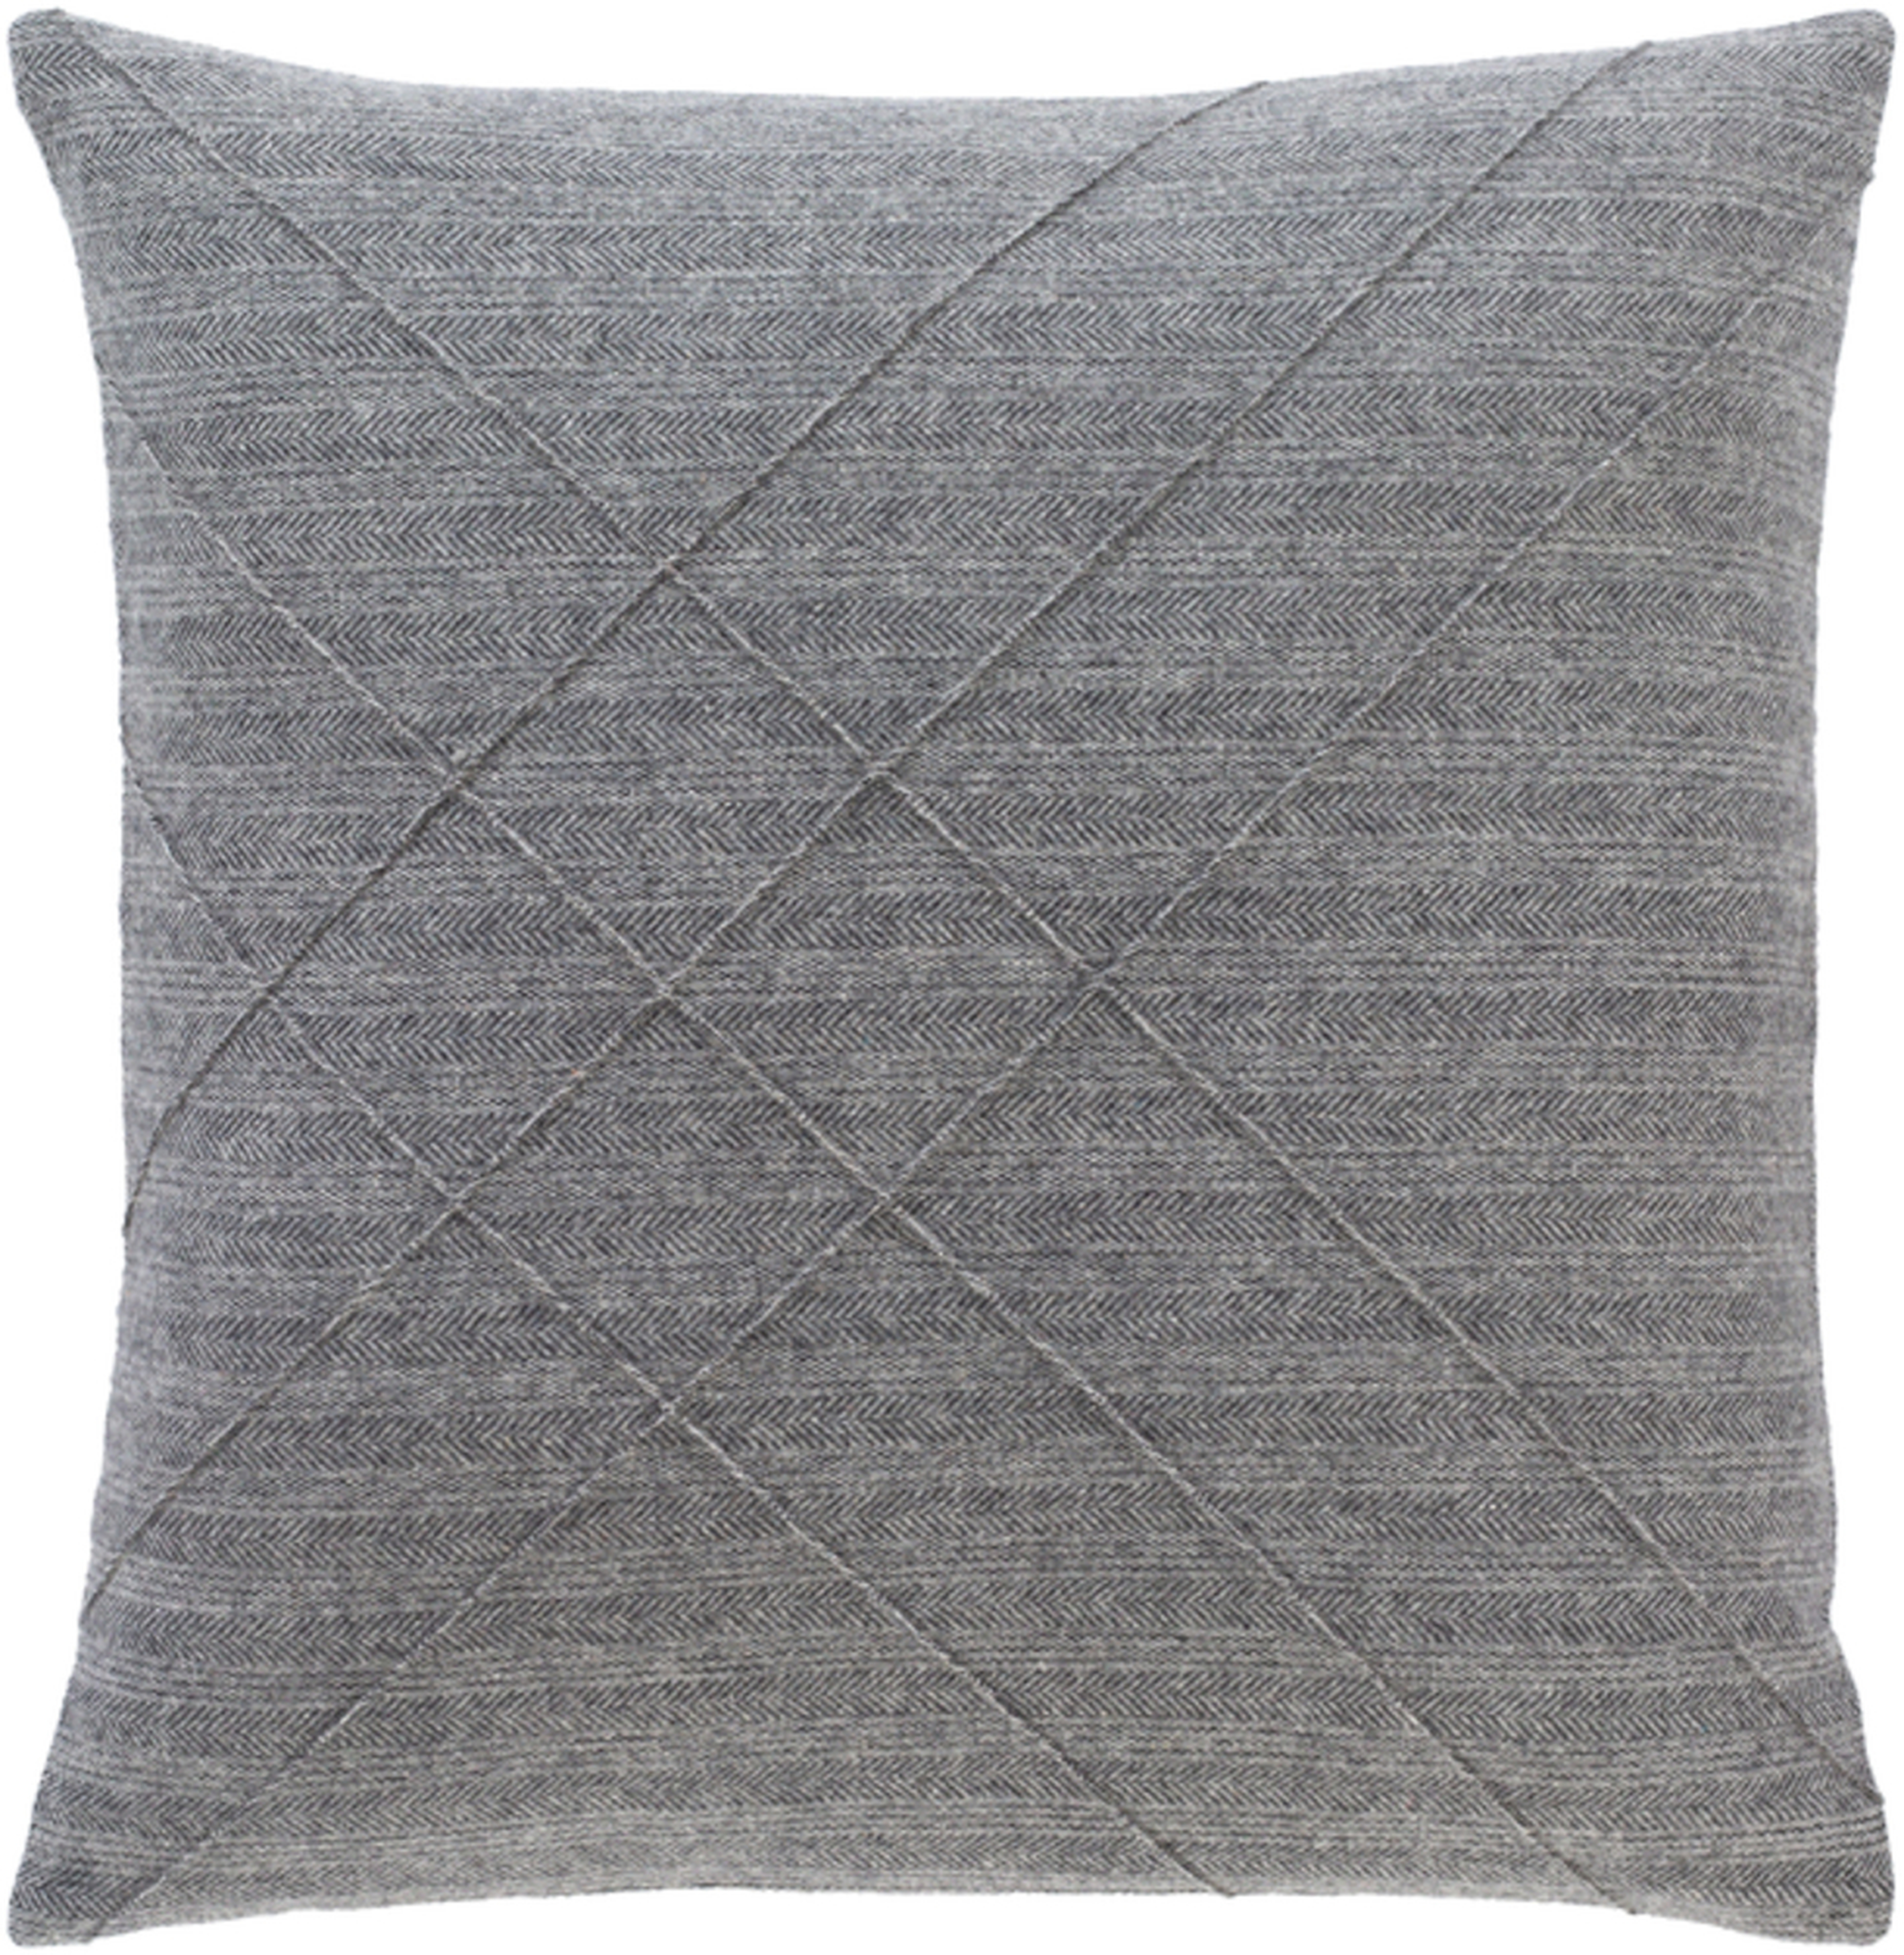 Welsley Pillow Cover, 18" x 18", Charcoal - Cove Goods